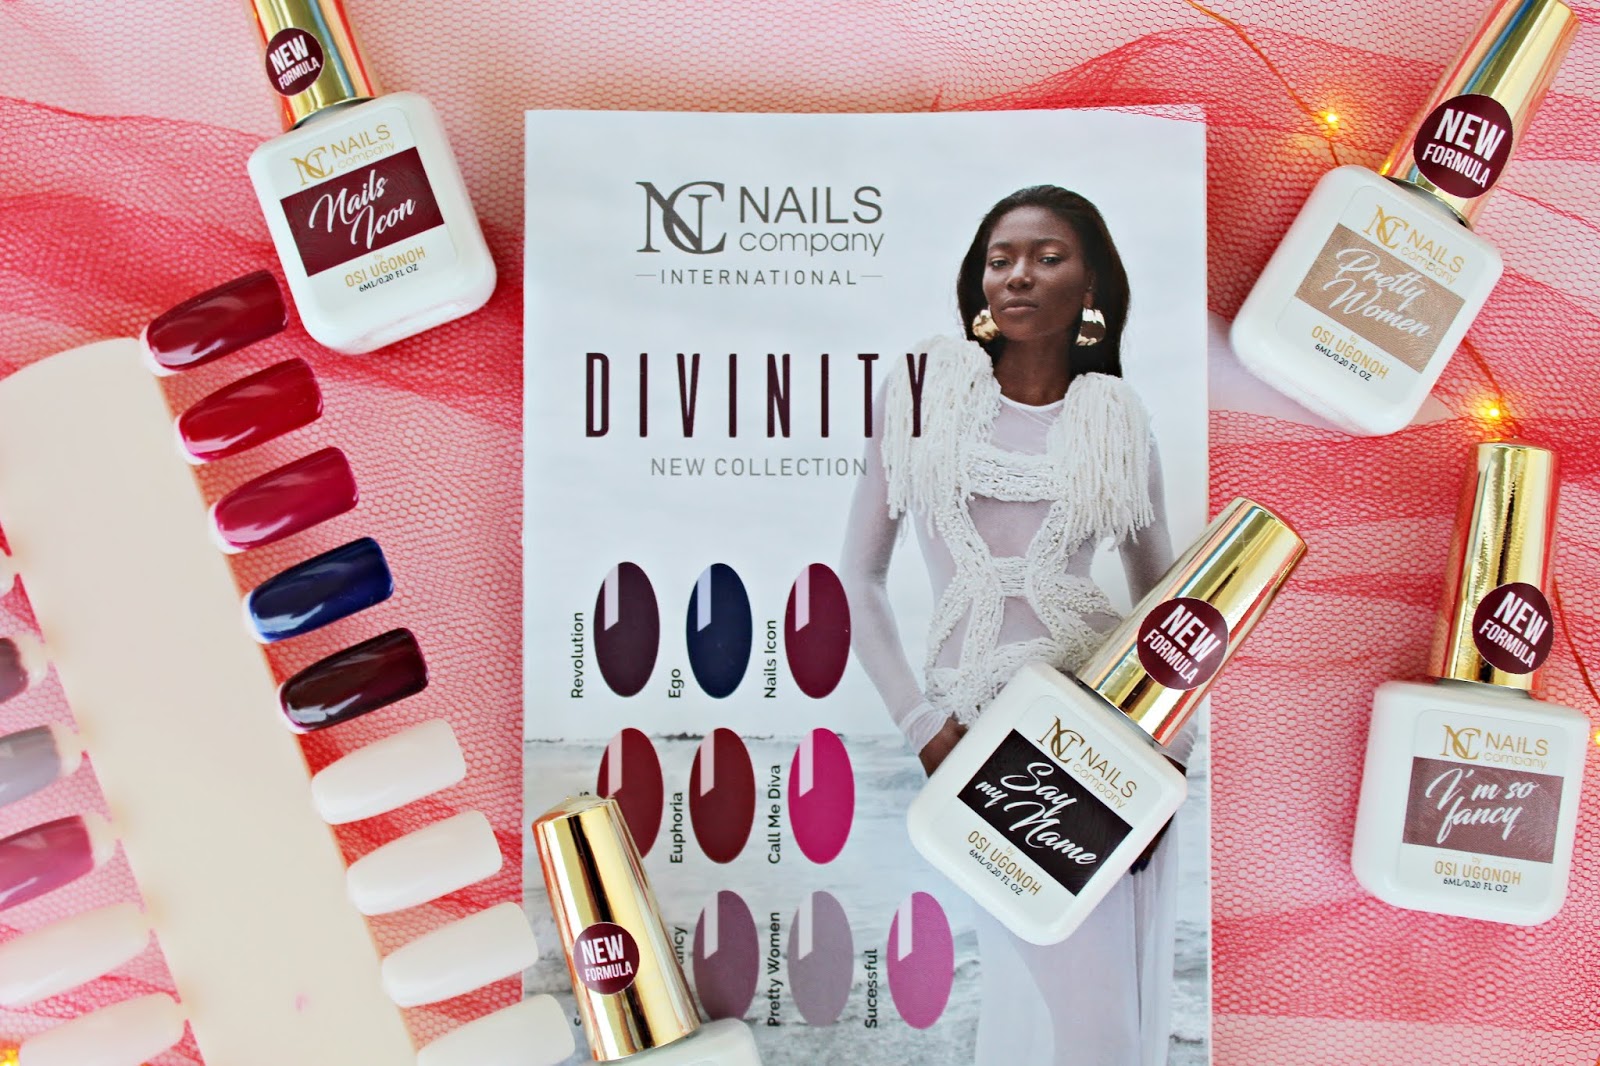 Nails Company - DIVINITY new collection by Osi Ugonoh | Zuzka Pisze